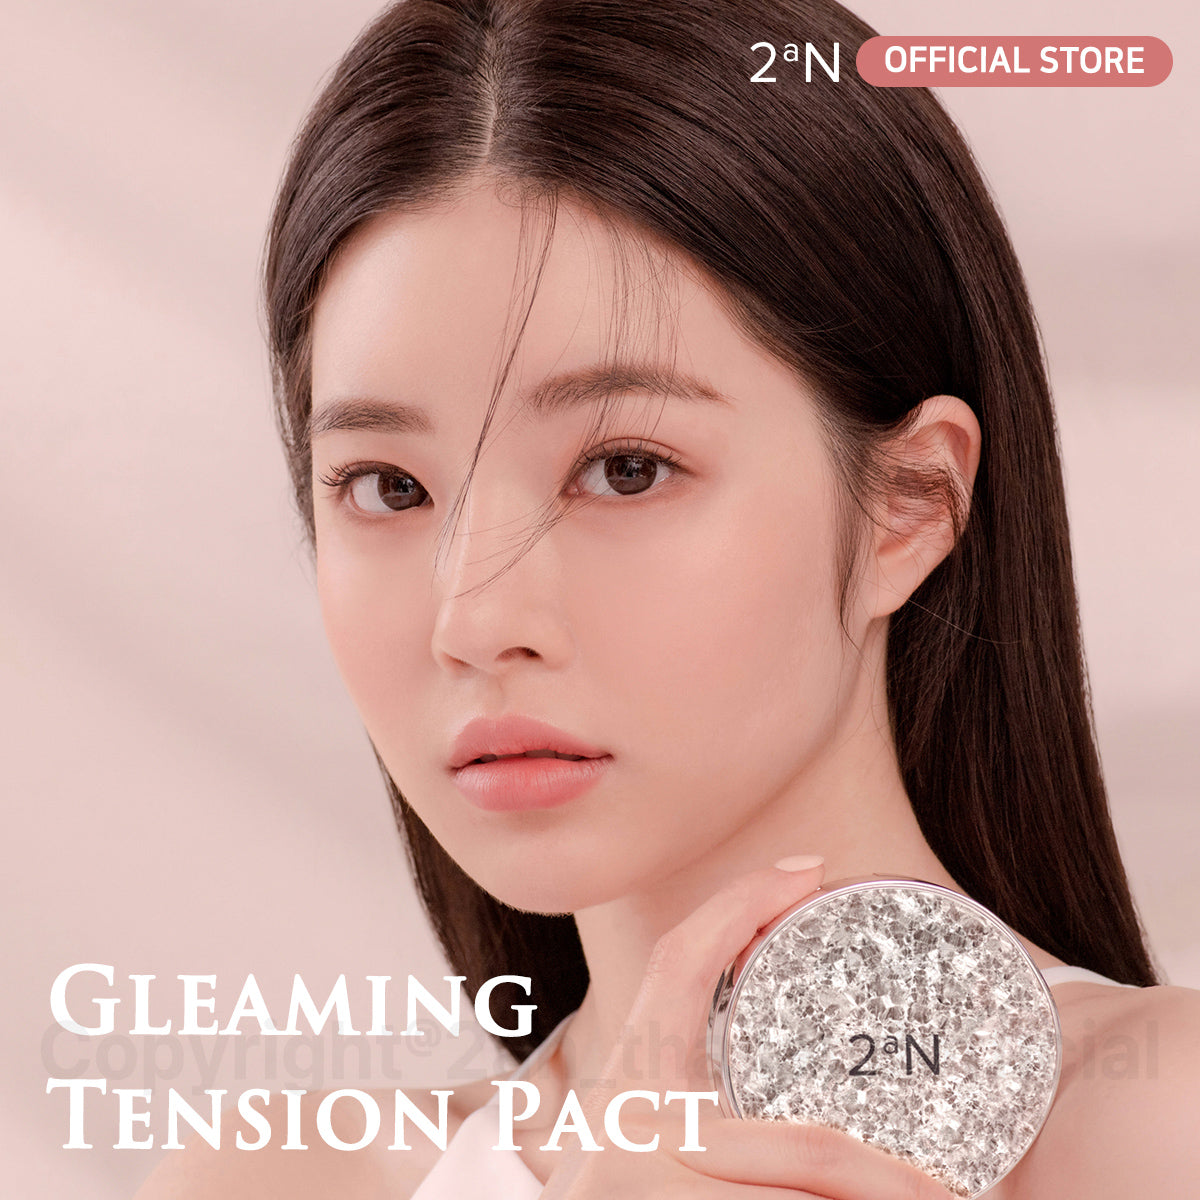 2aN CUSHION - Gleaming Tension Pact